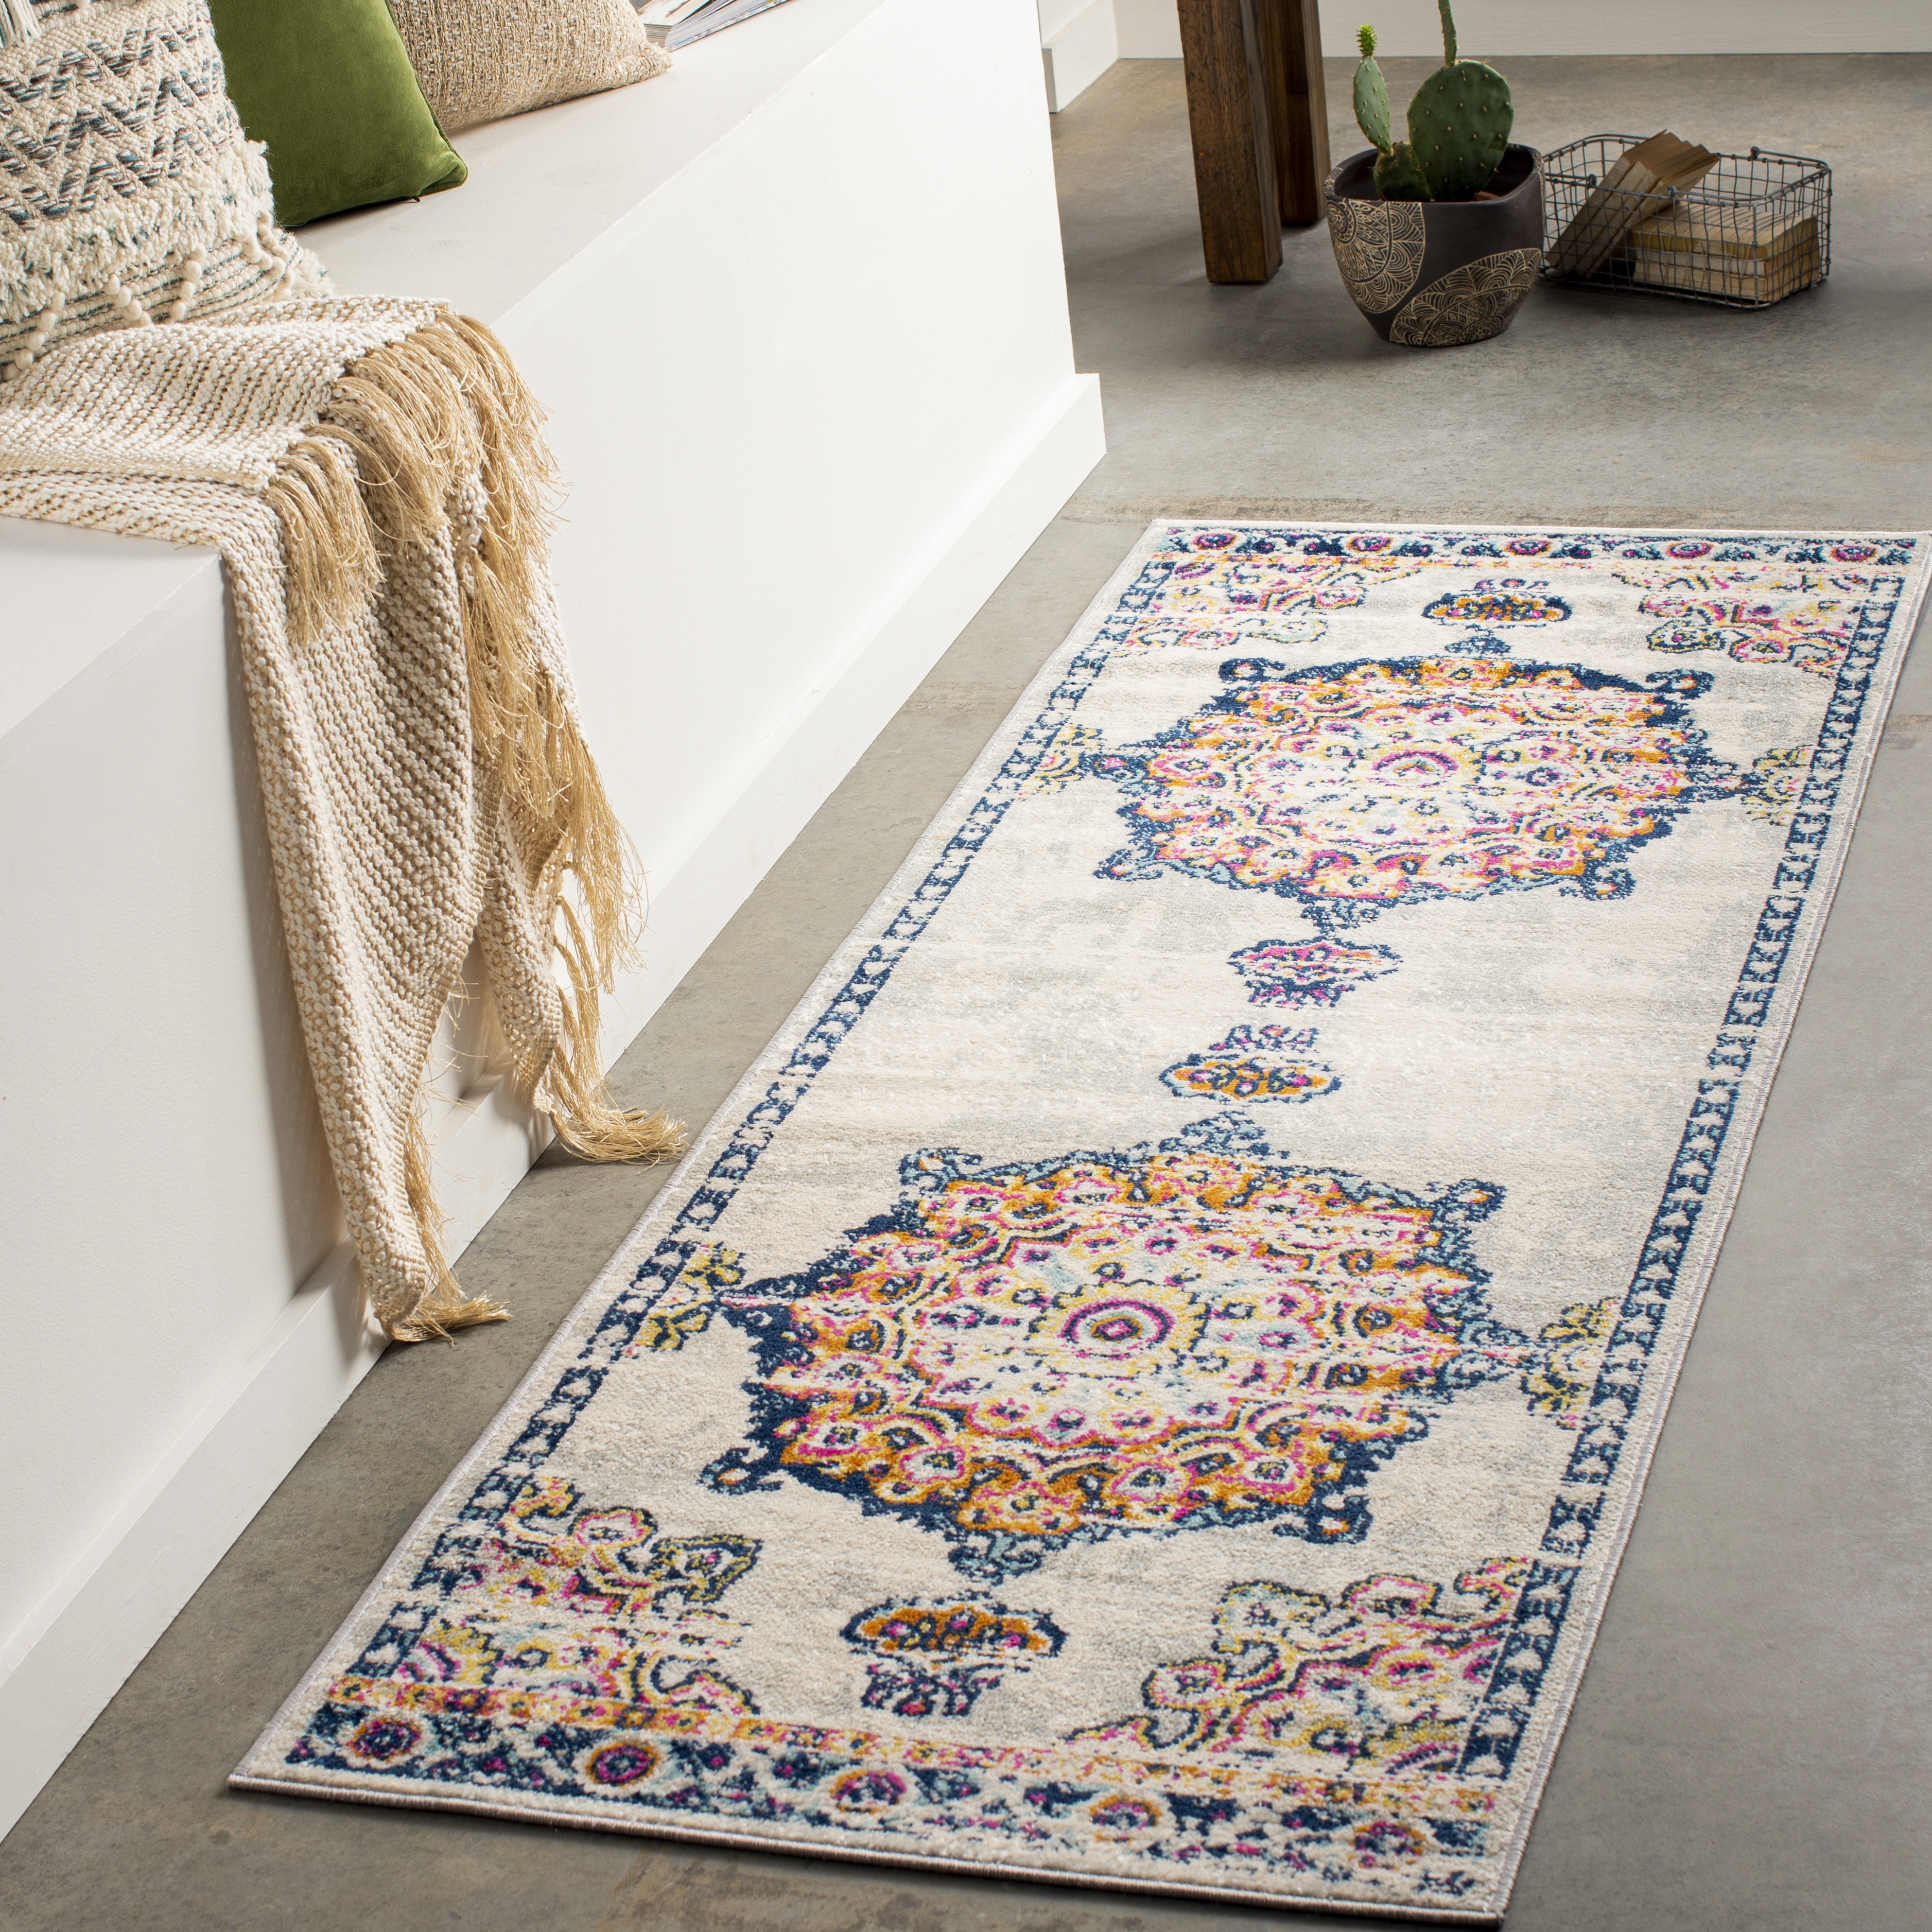 Chester Rug, 2'7" x 7'3" - Image 1